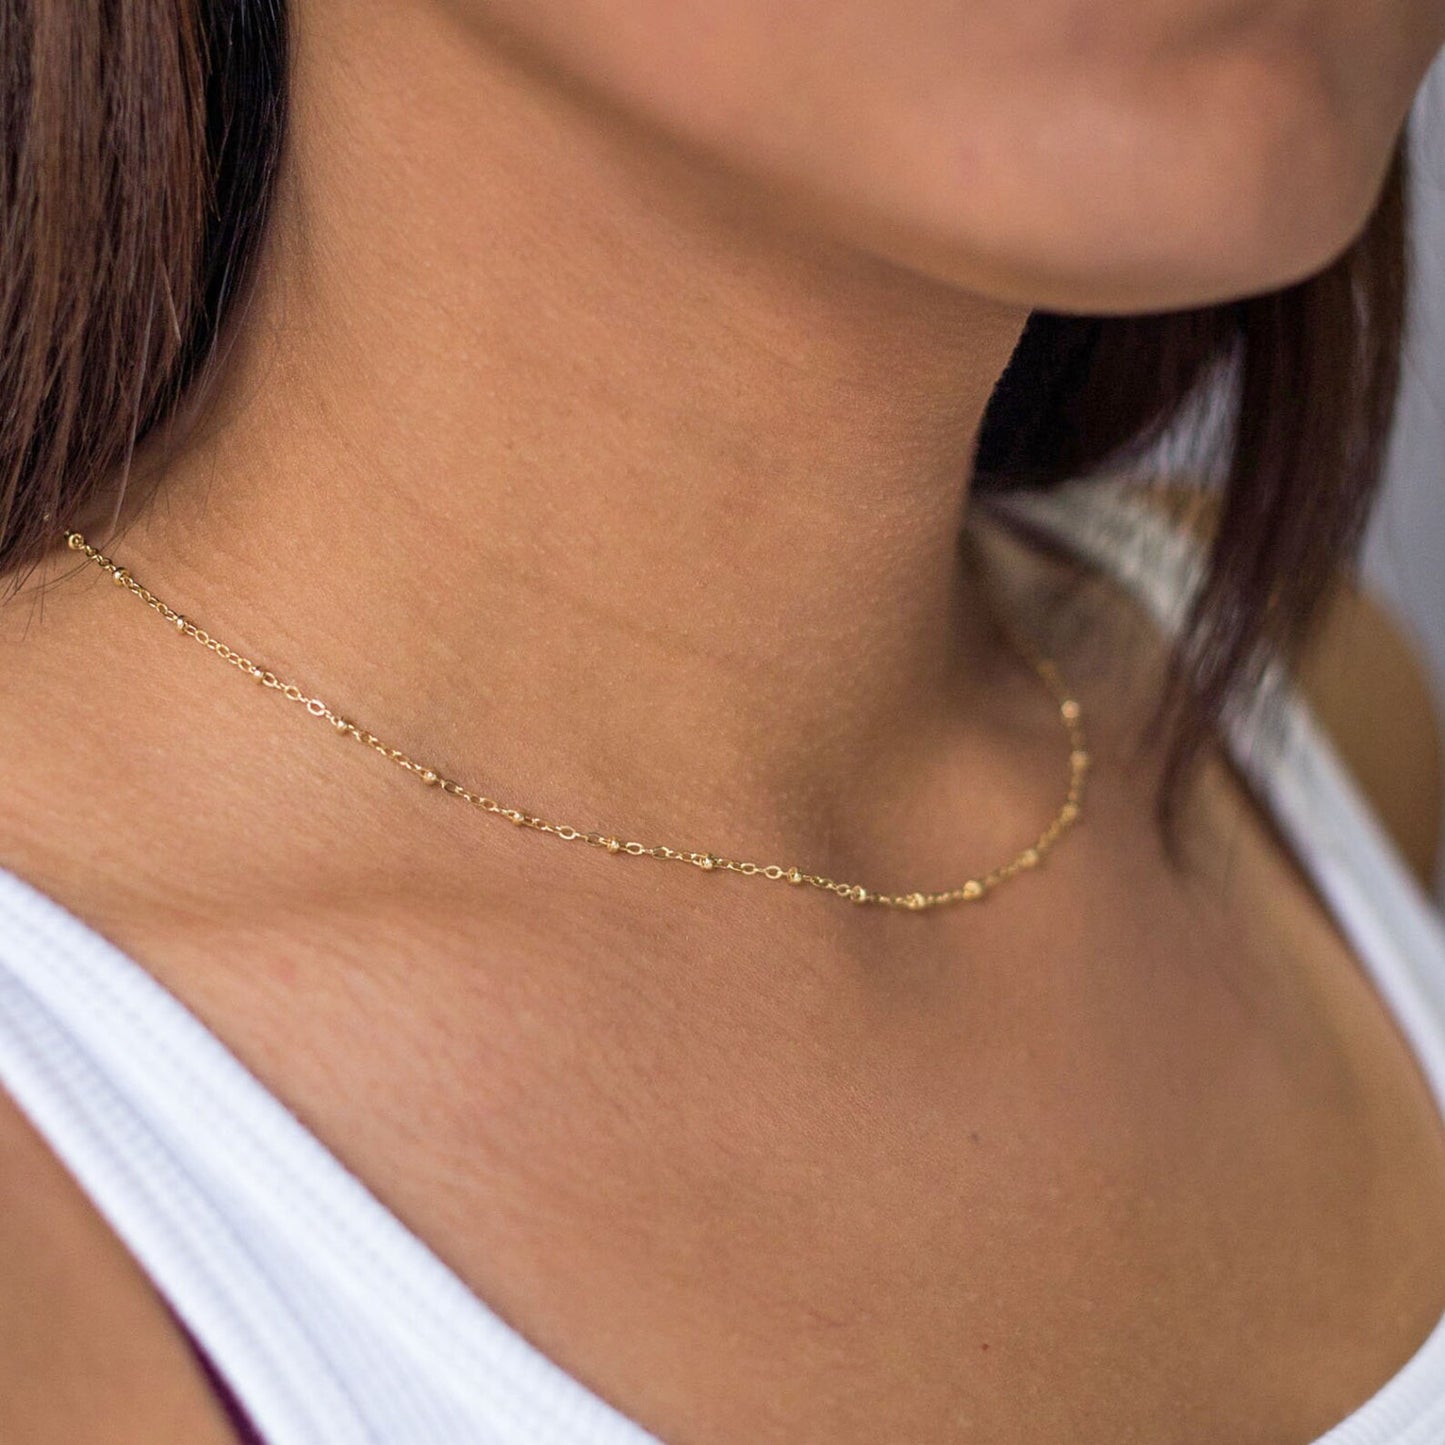 Satellite Choker Necklace - Available in 14k Gold Filled or Sterling Silver